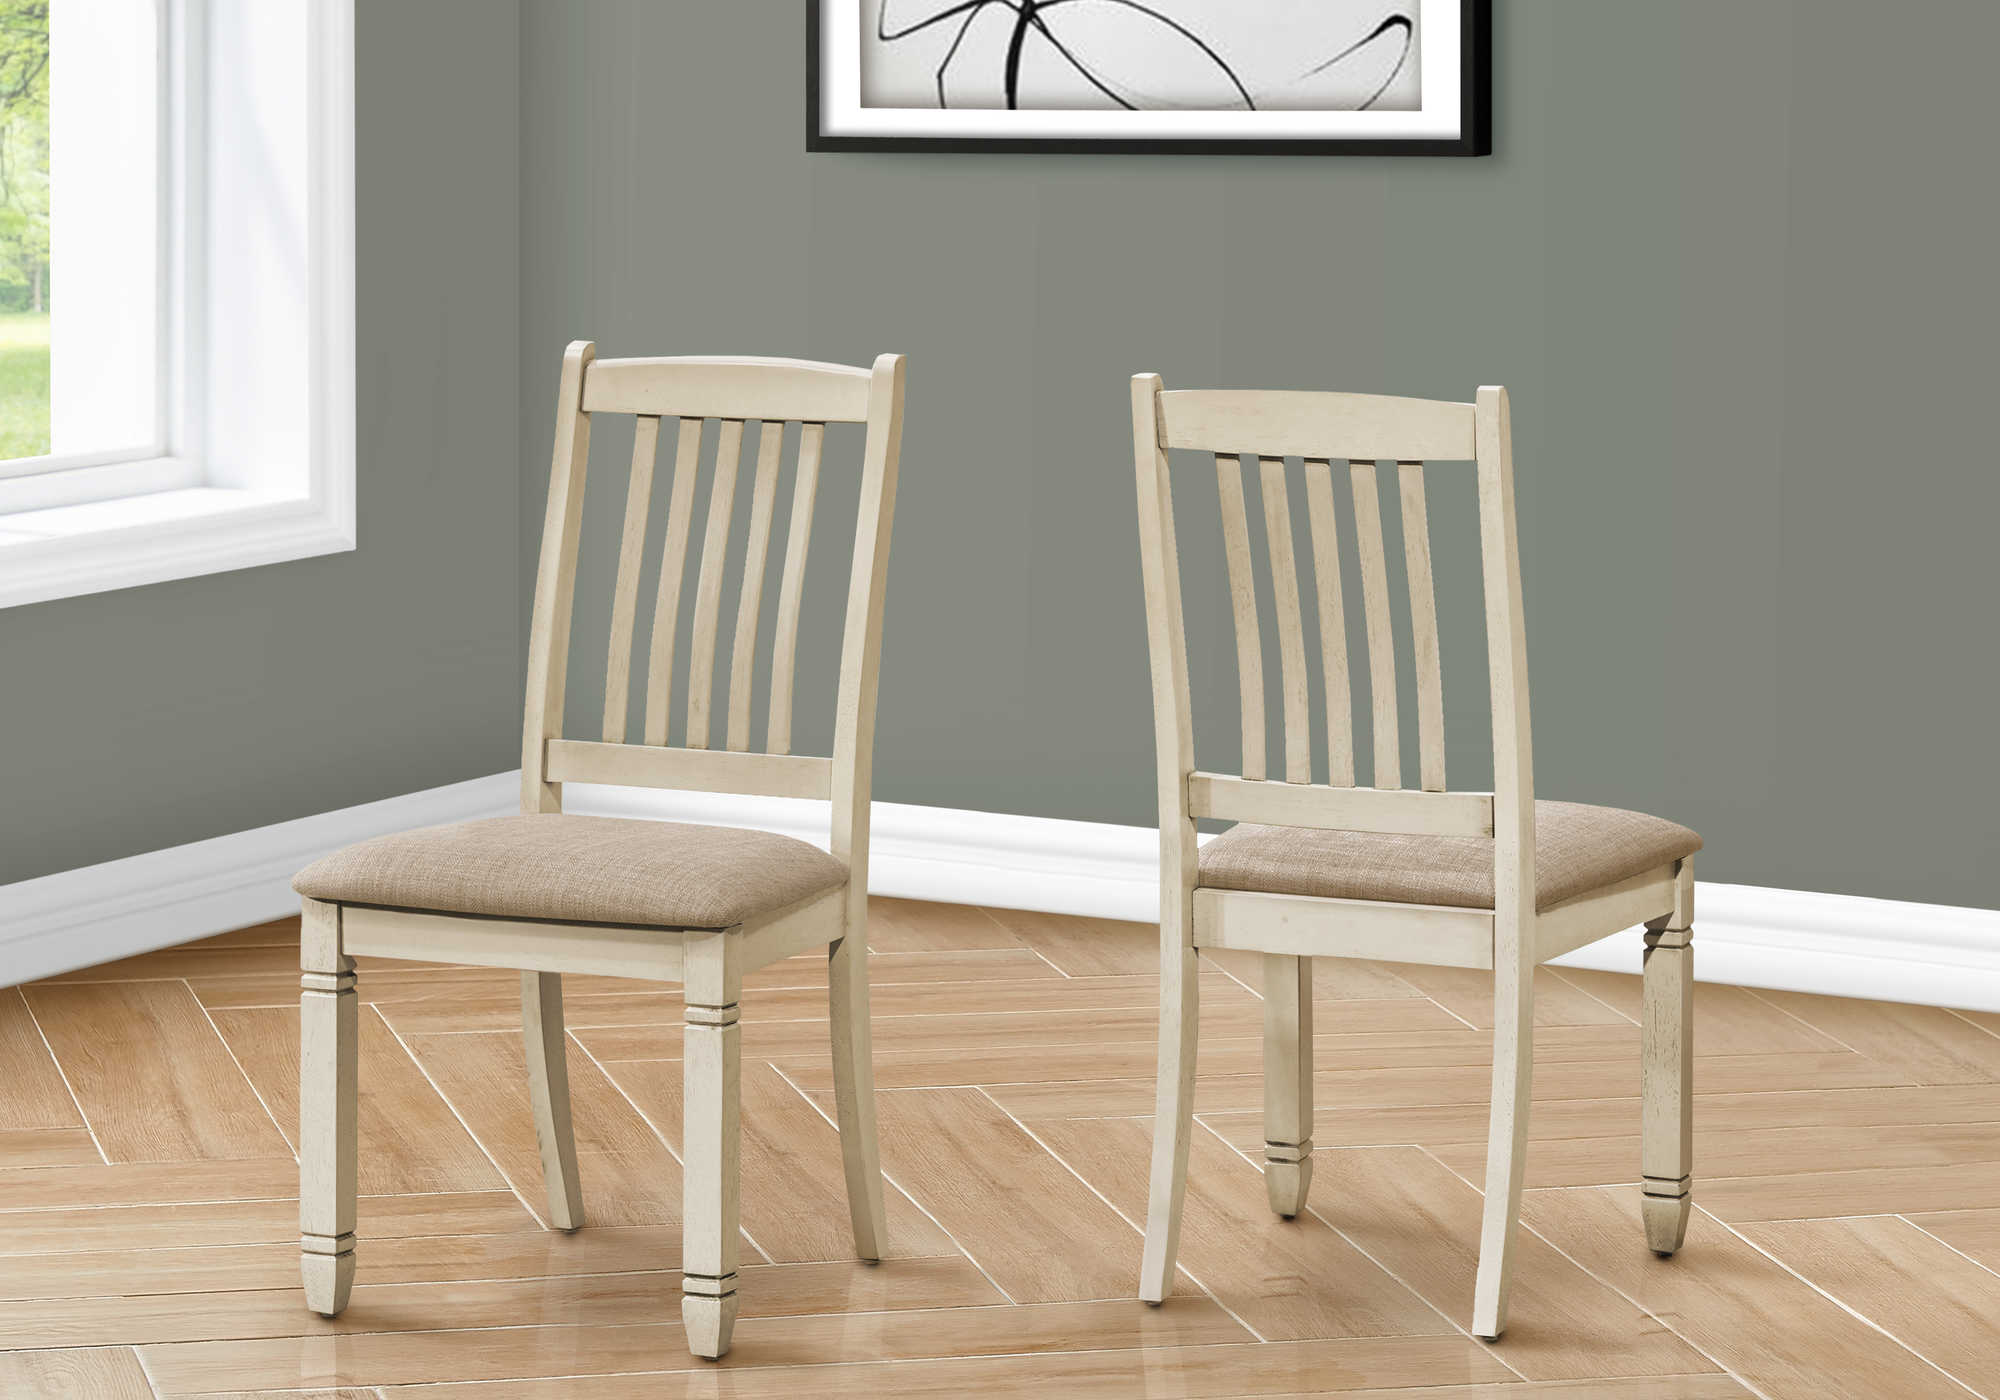 DINING CHAIR - 2PCS / 38"H UPHOLSTERED BEIGE FABRIC